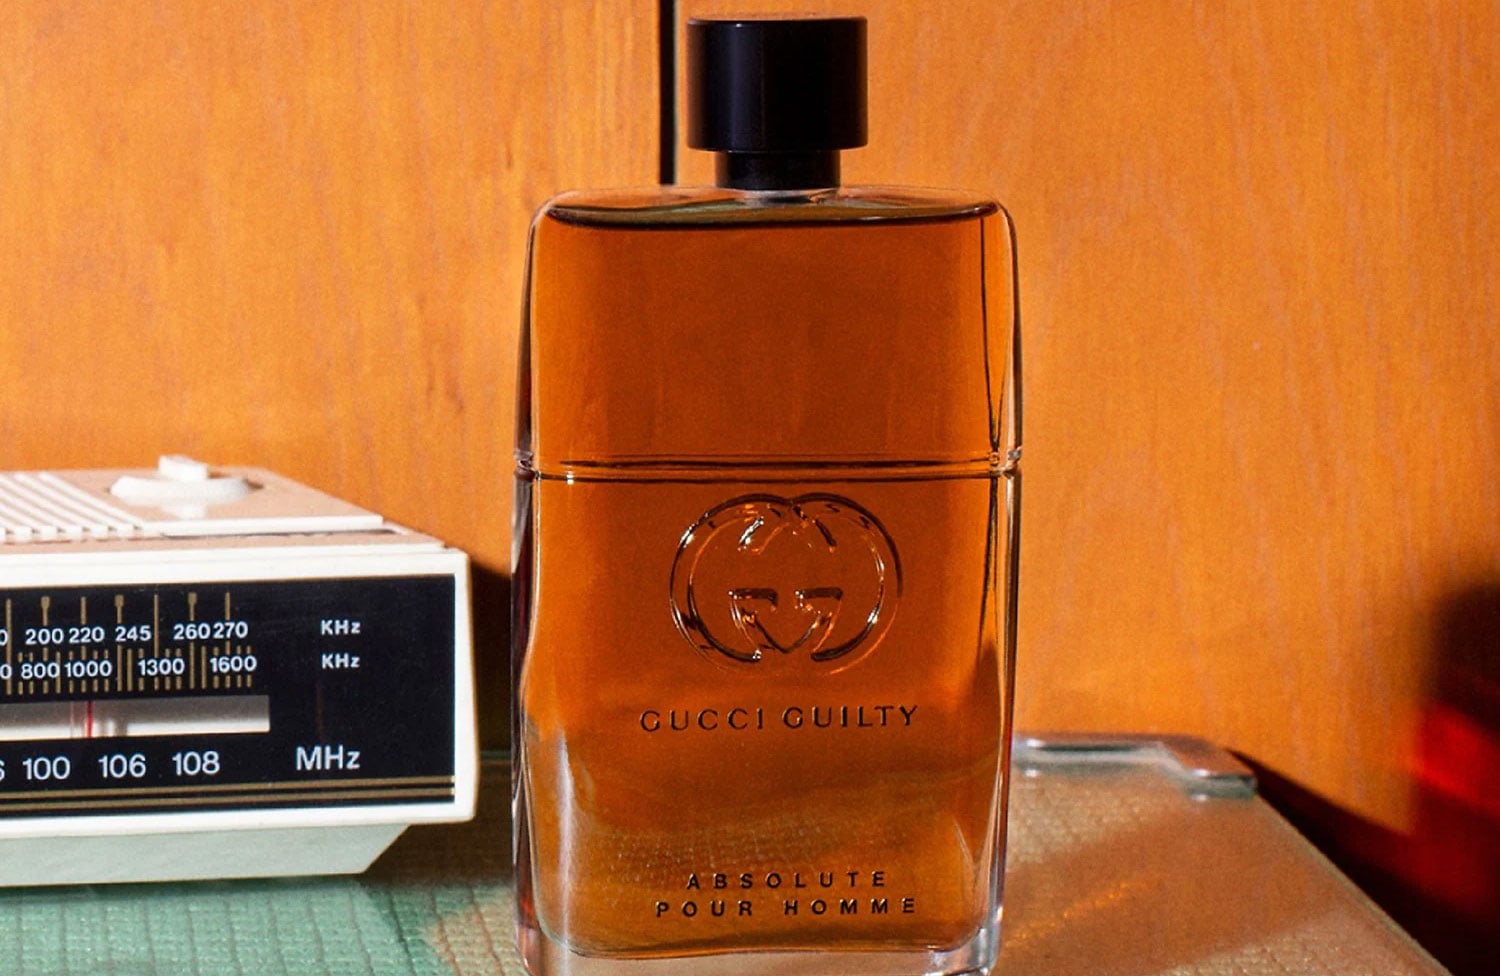 The Top 10 Gucci Perfumes - A Guide to Understanding and Choosing Perfumes